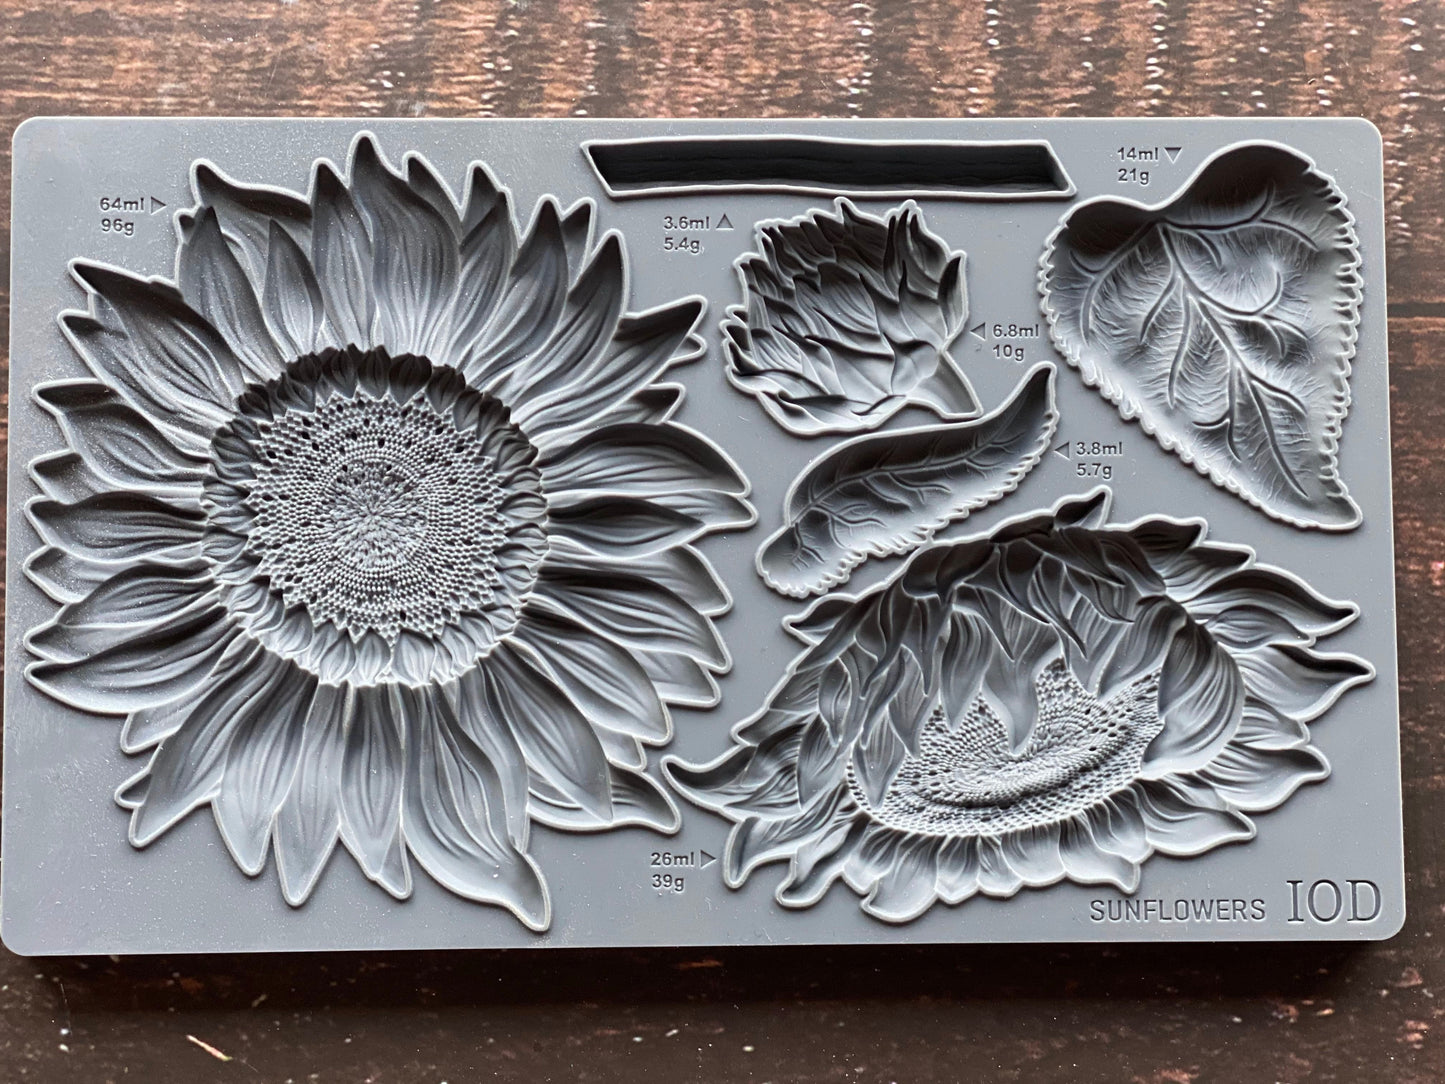 Sunflowers 6x10" Decor Mould by Iron Orchid Designs (IOD)